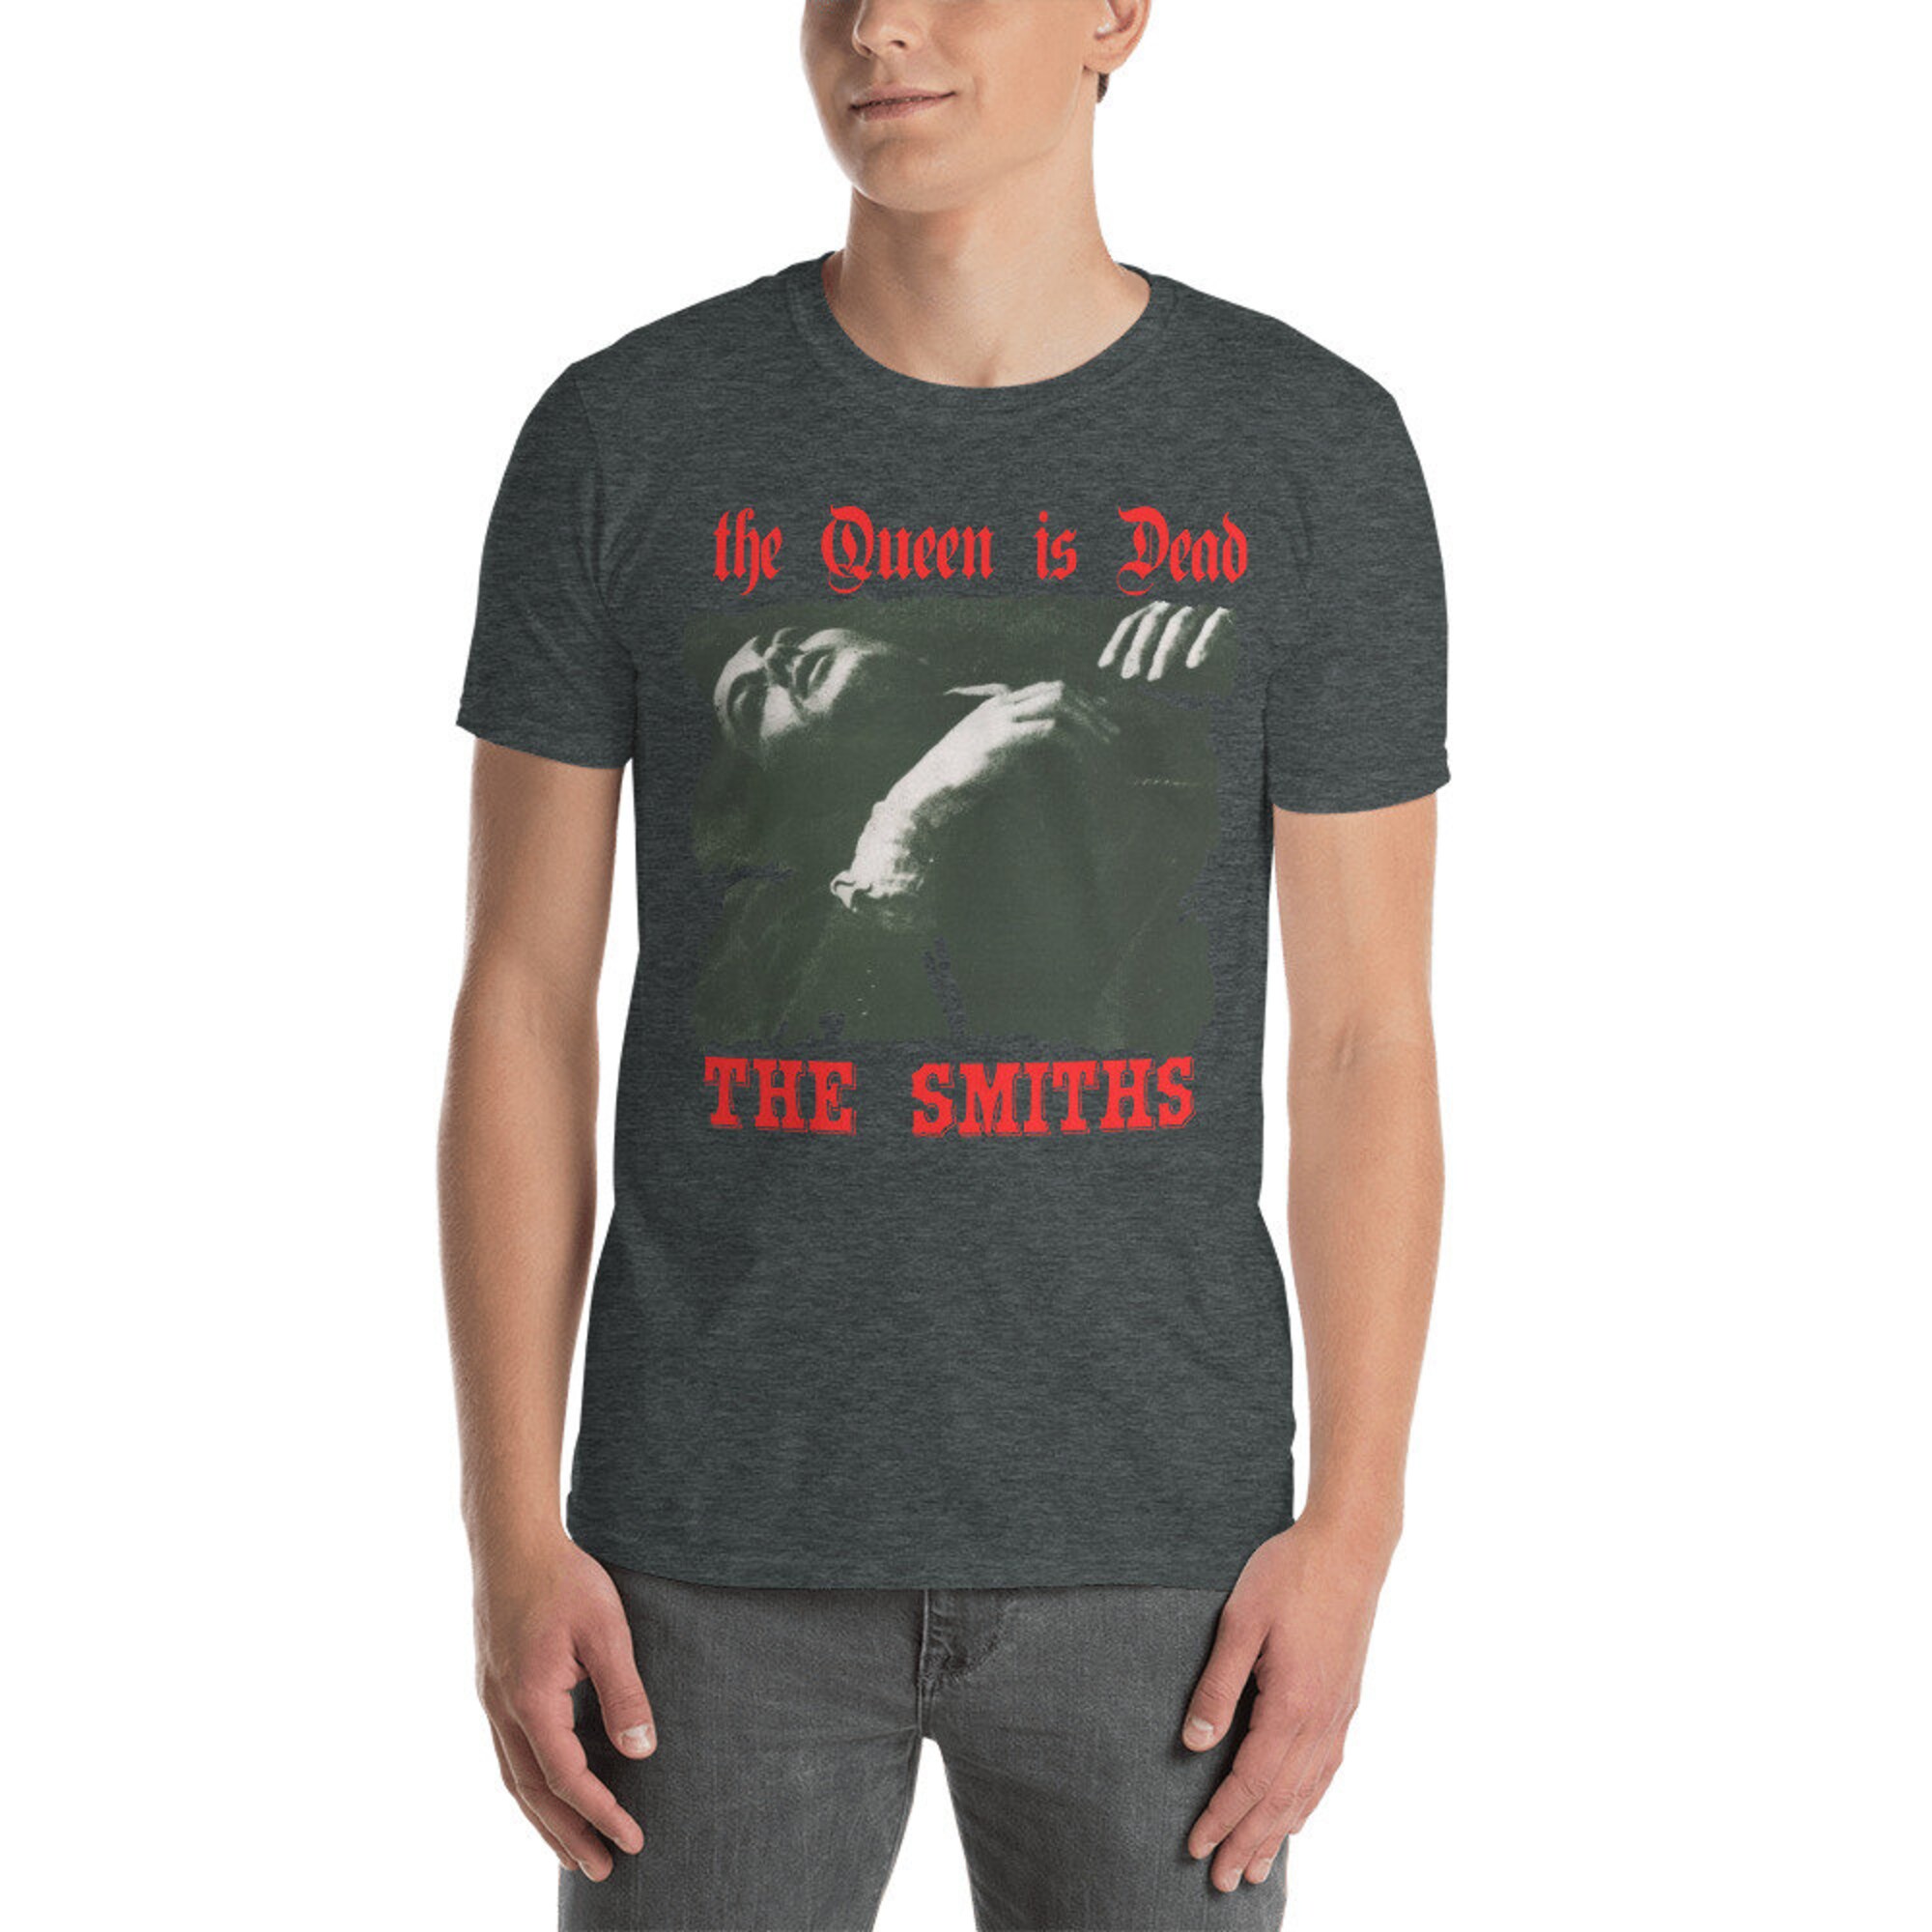 Discover The Smiths The Queen is Dead T-Shirt